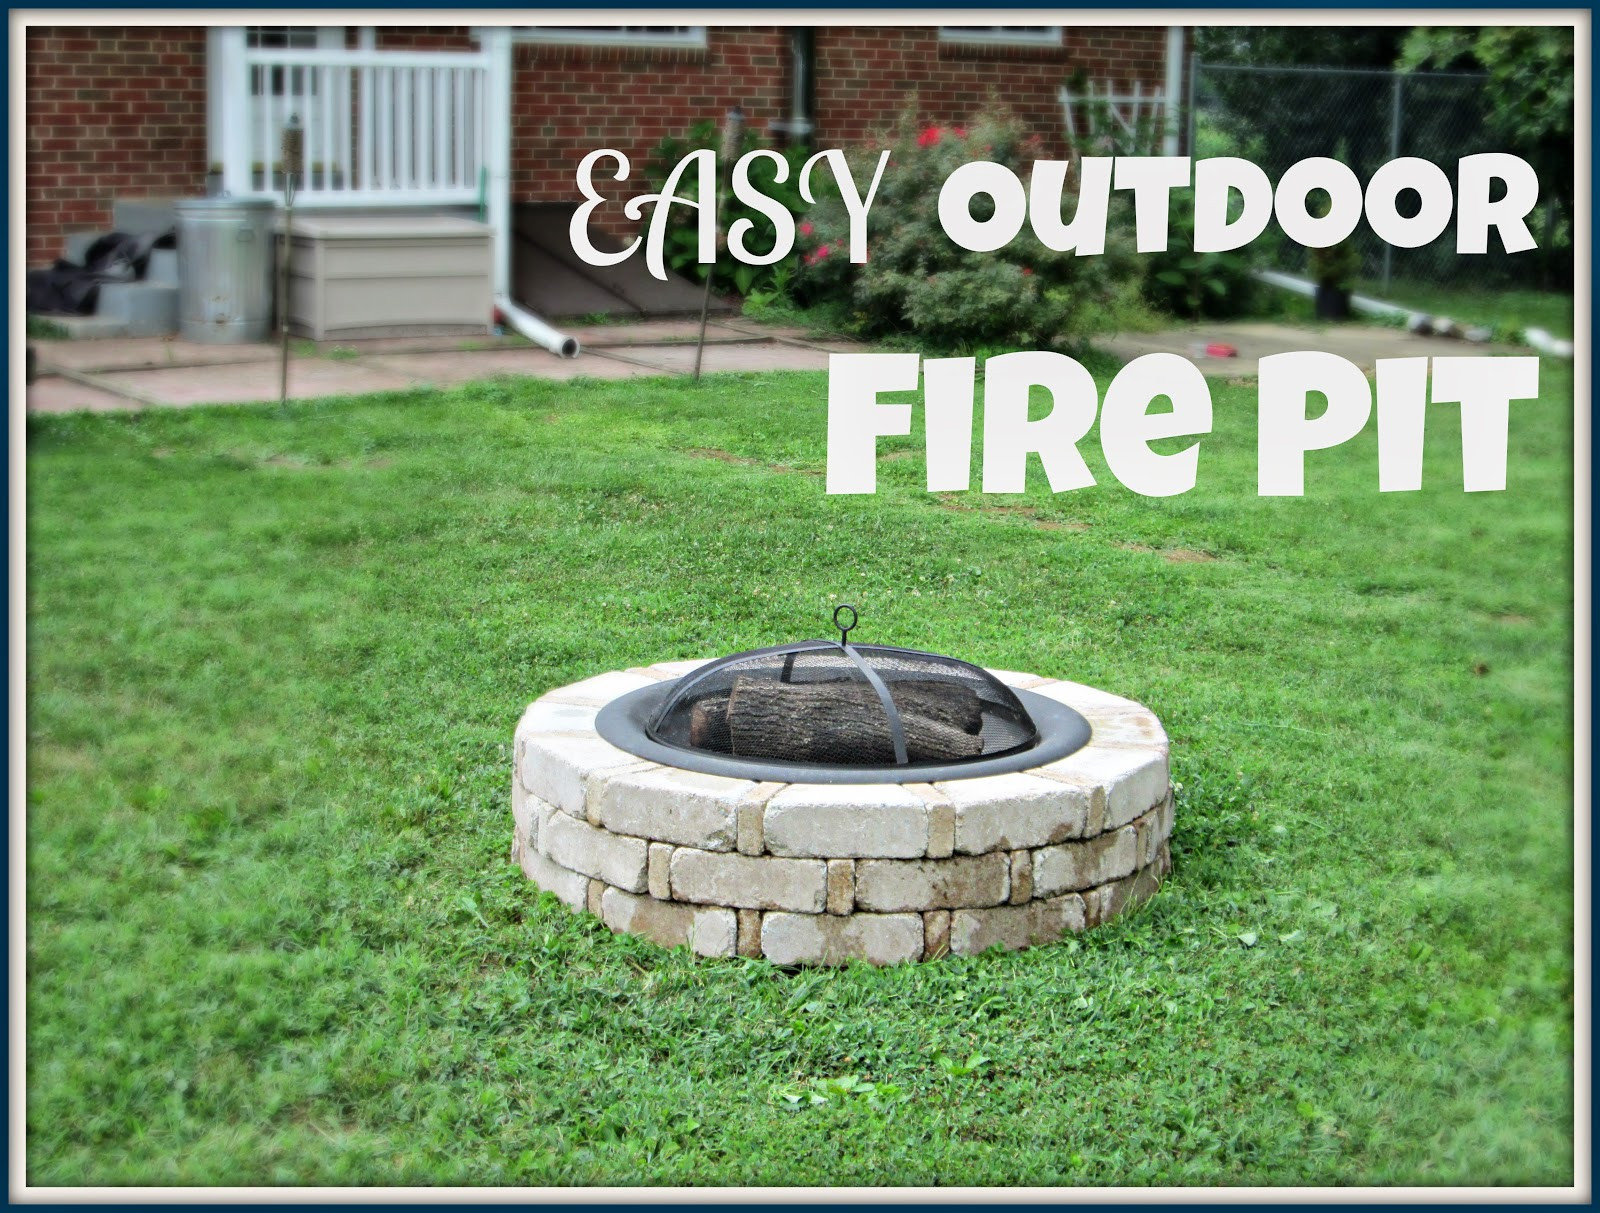 Backyard Fire Pit Plan
 Laura s Plans Easy Outdoor Fire Pit